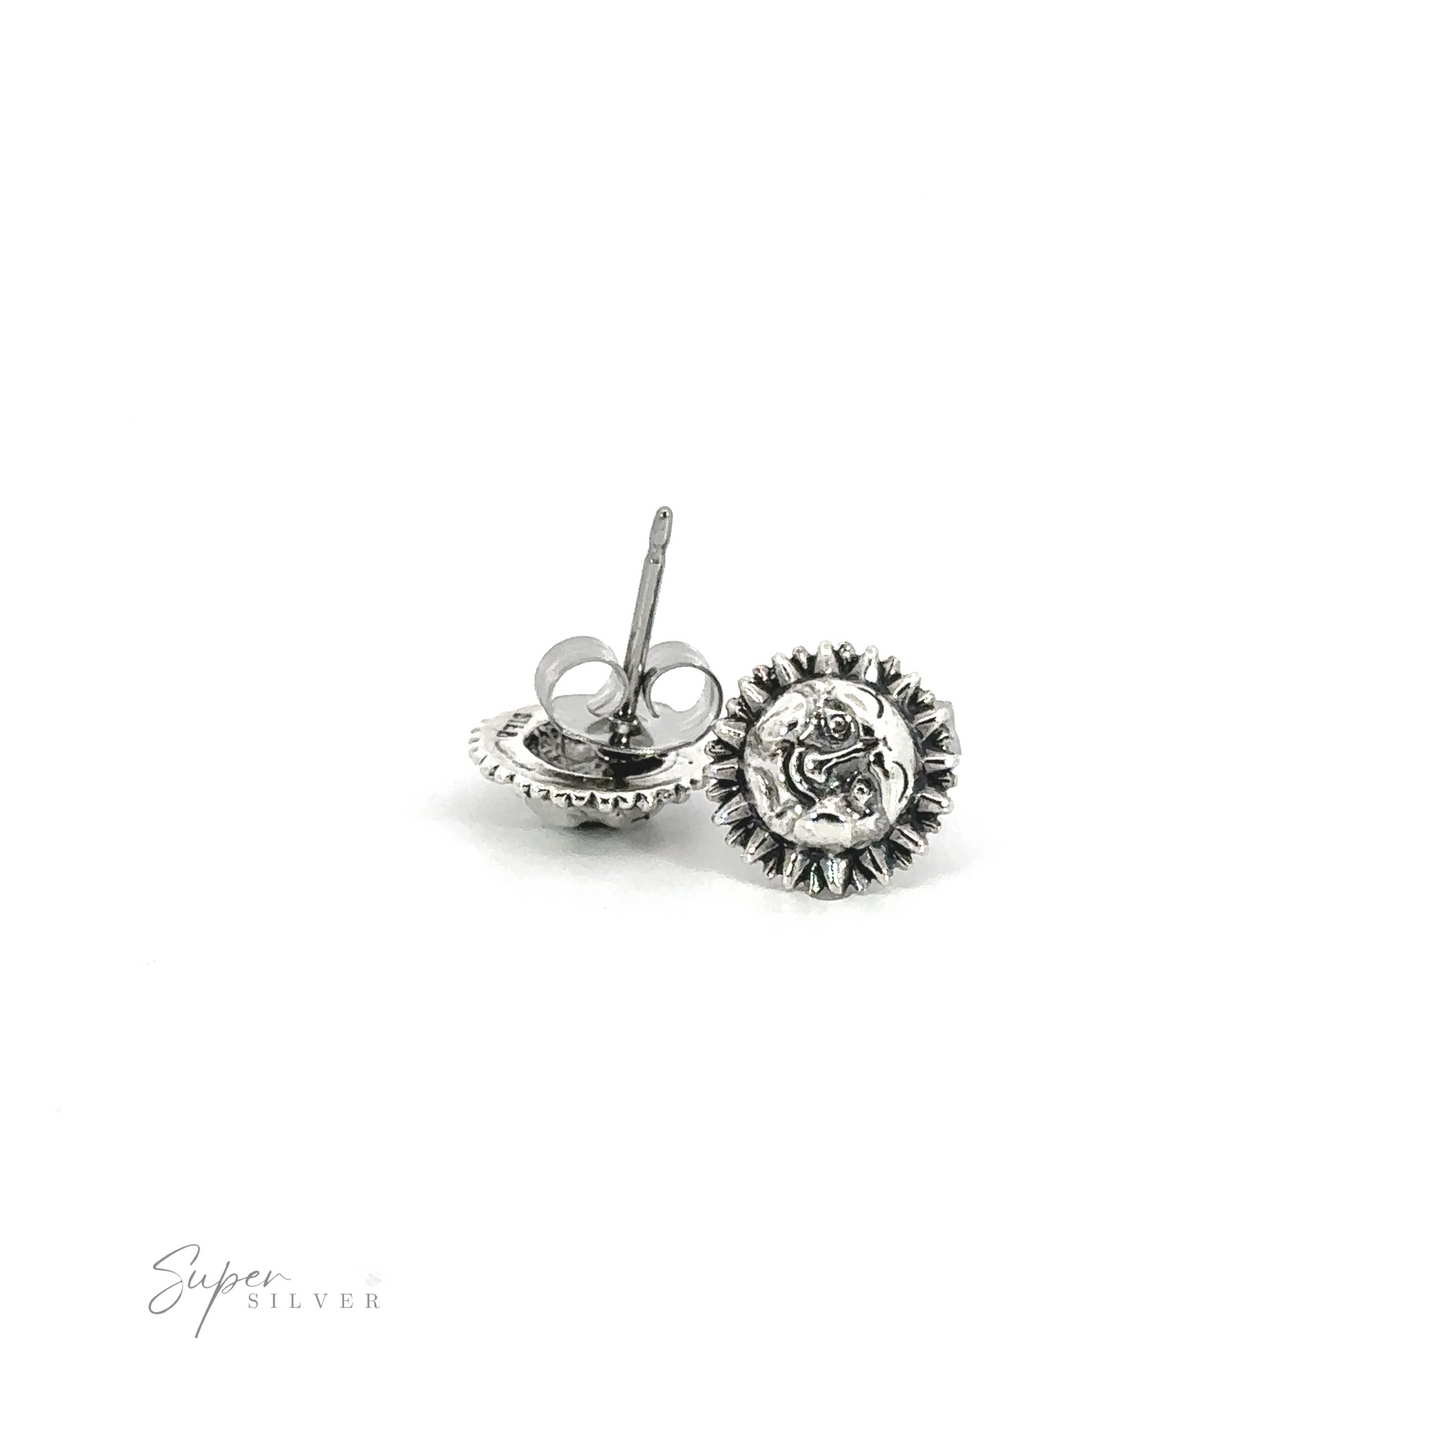 A pair of Sun with Face Studs, perfect for a celestial charm in your jewelry collection.